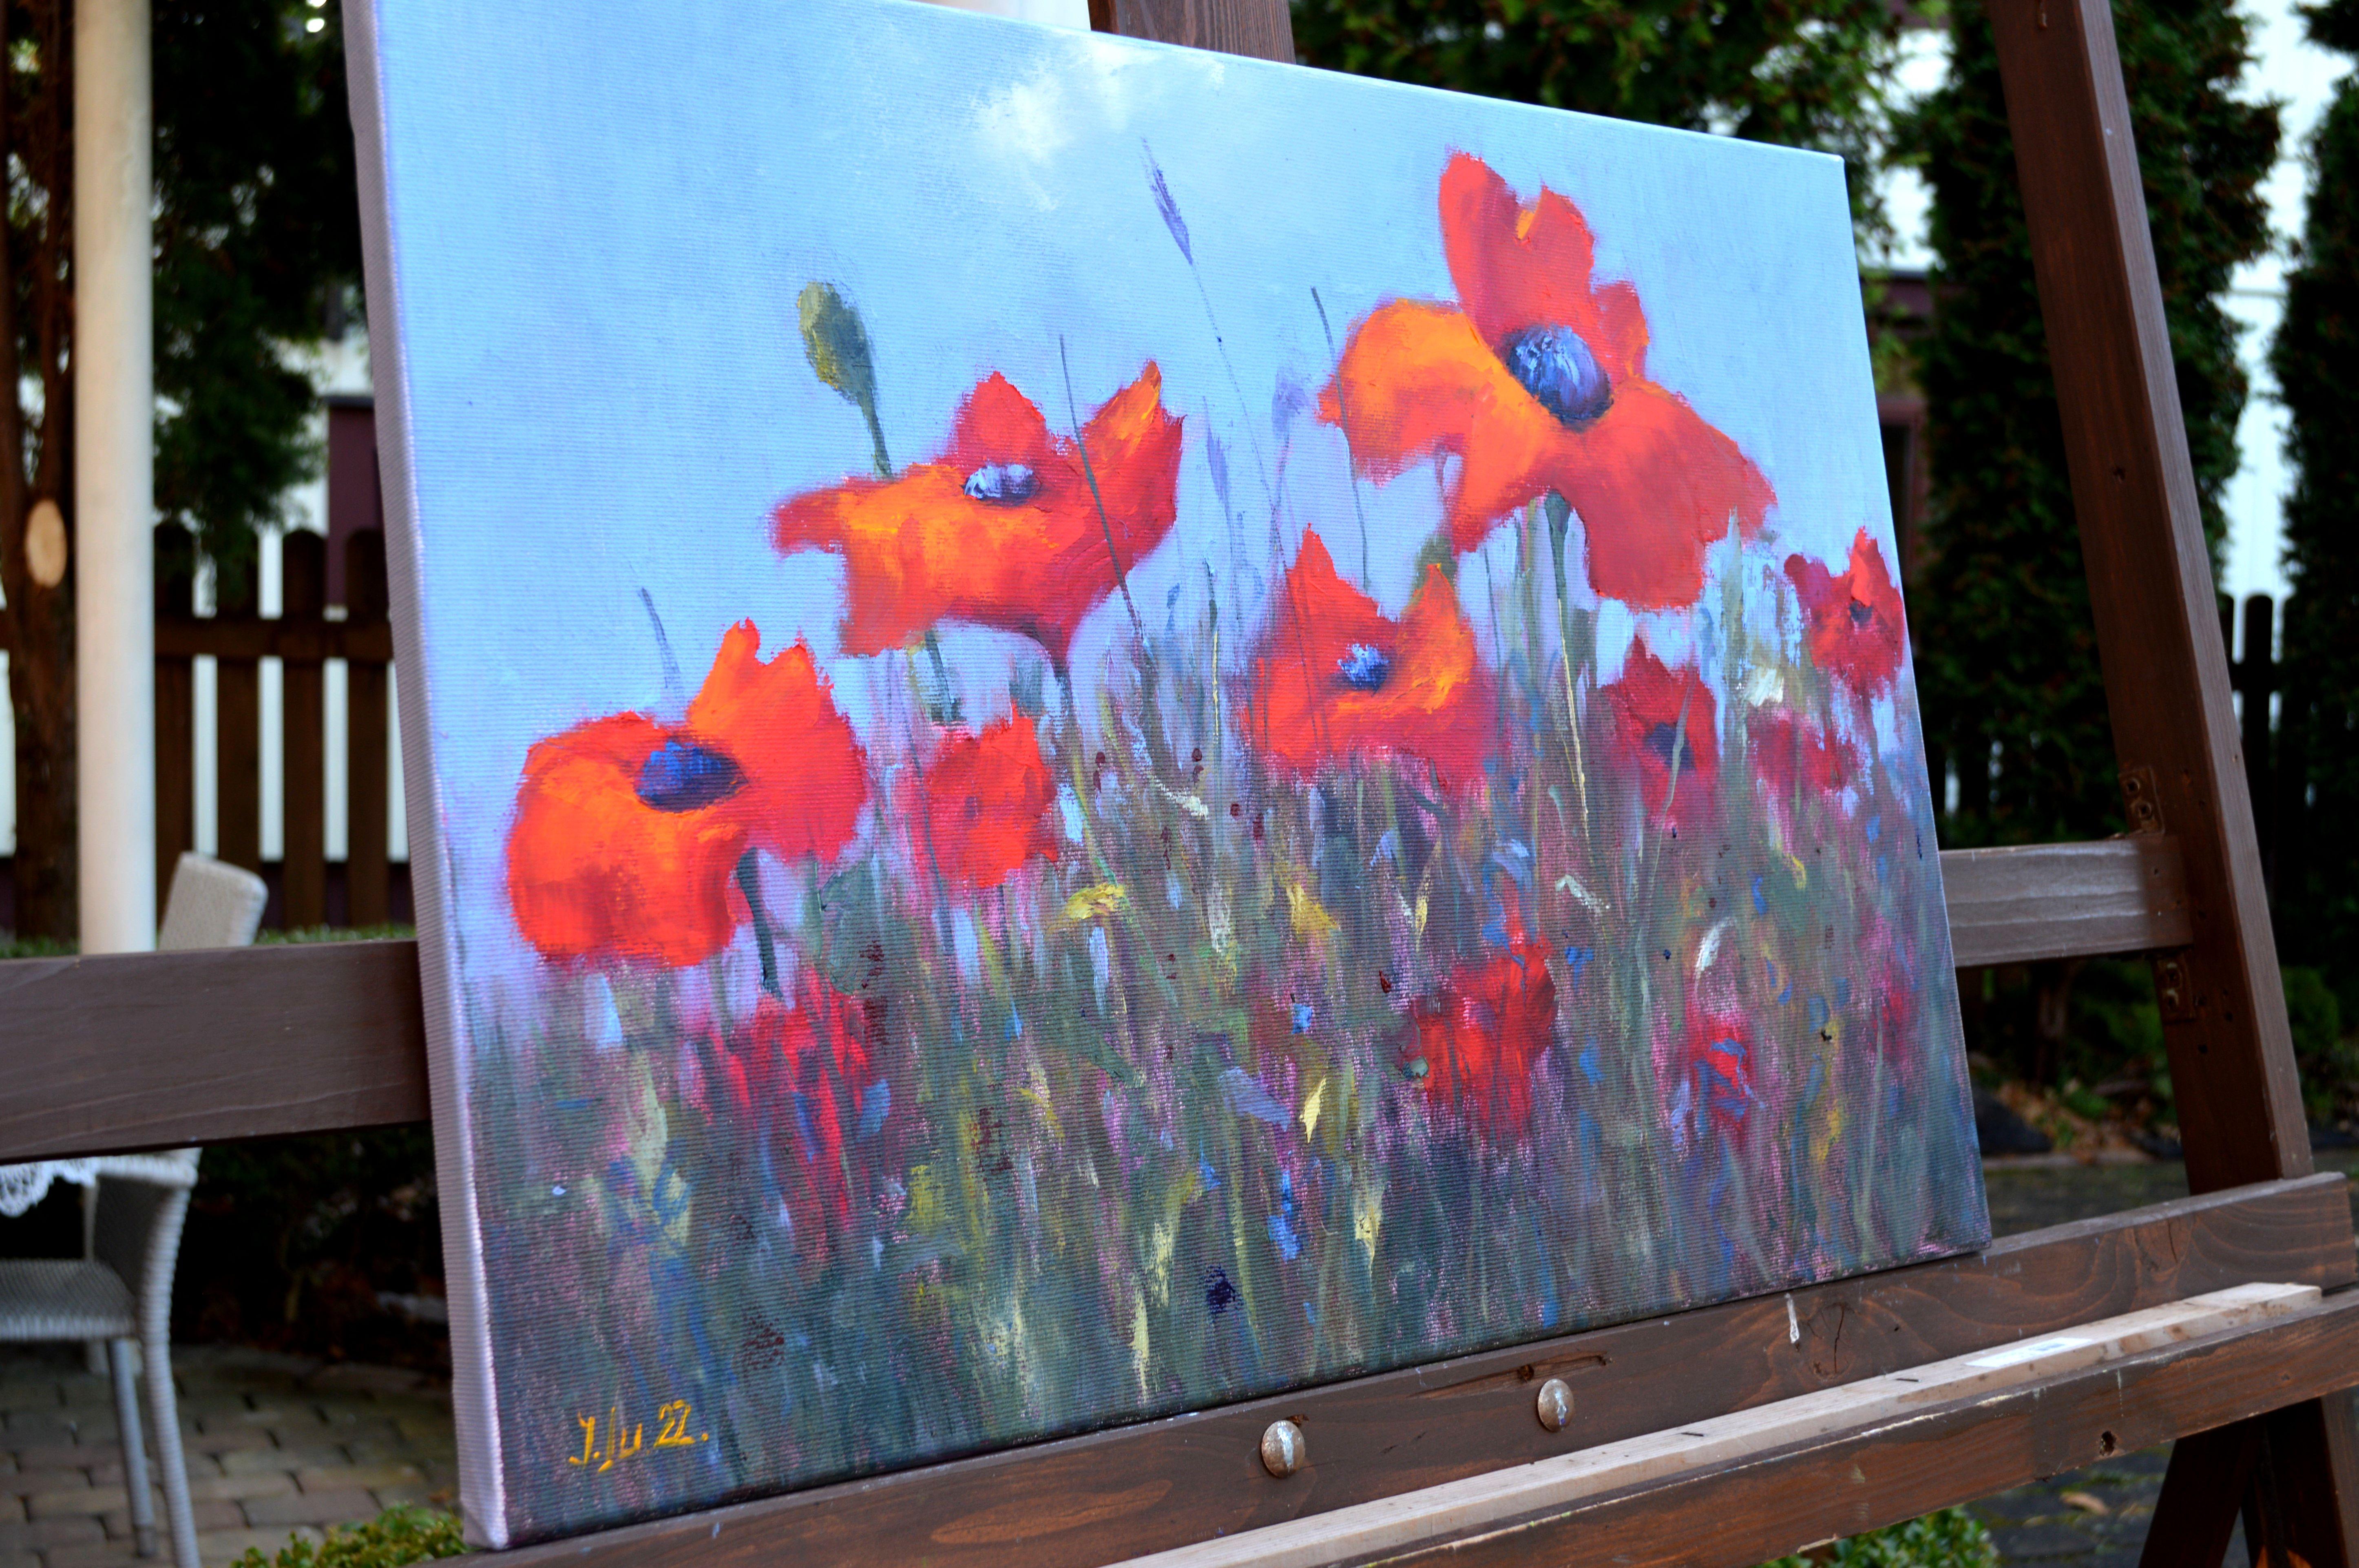 In this oil painting, I've poured my soul into capturing the wild, vibrant essence of poppies dancing in the breeze. Employing bold expressionist strokes and impressionistic color blends, the vivid reds and lush greens come alive, embodying passion,